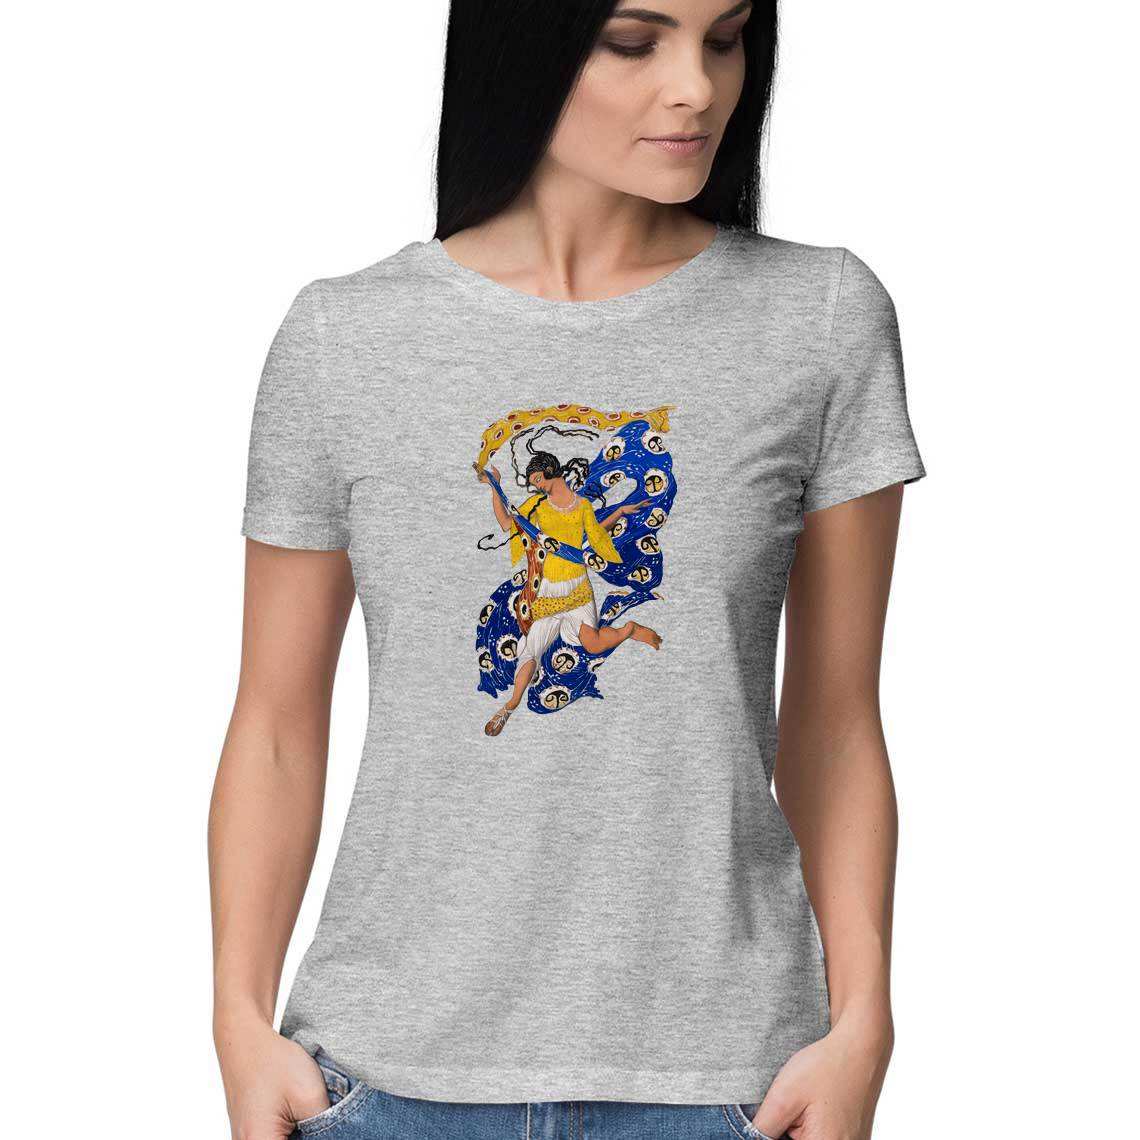 The Dancer who jumped into Dreamland Women's Graphic T-Shirt - CBD Store India